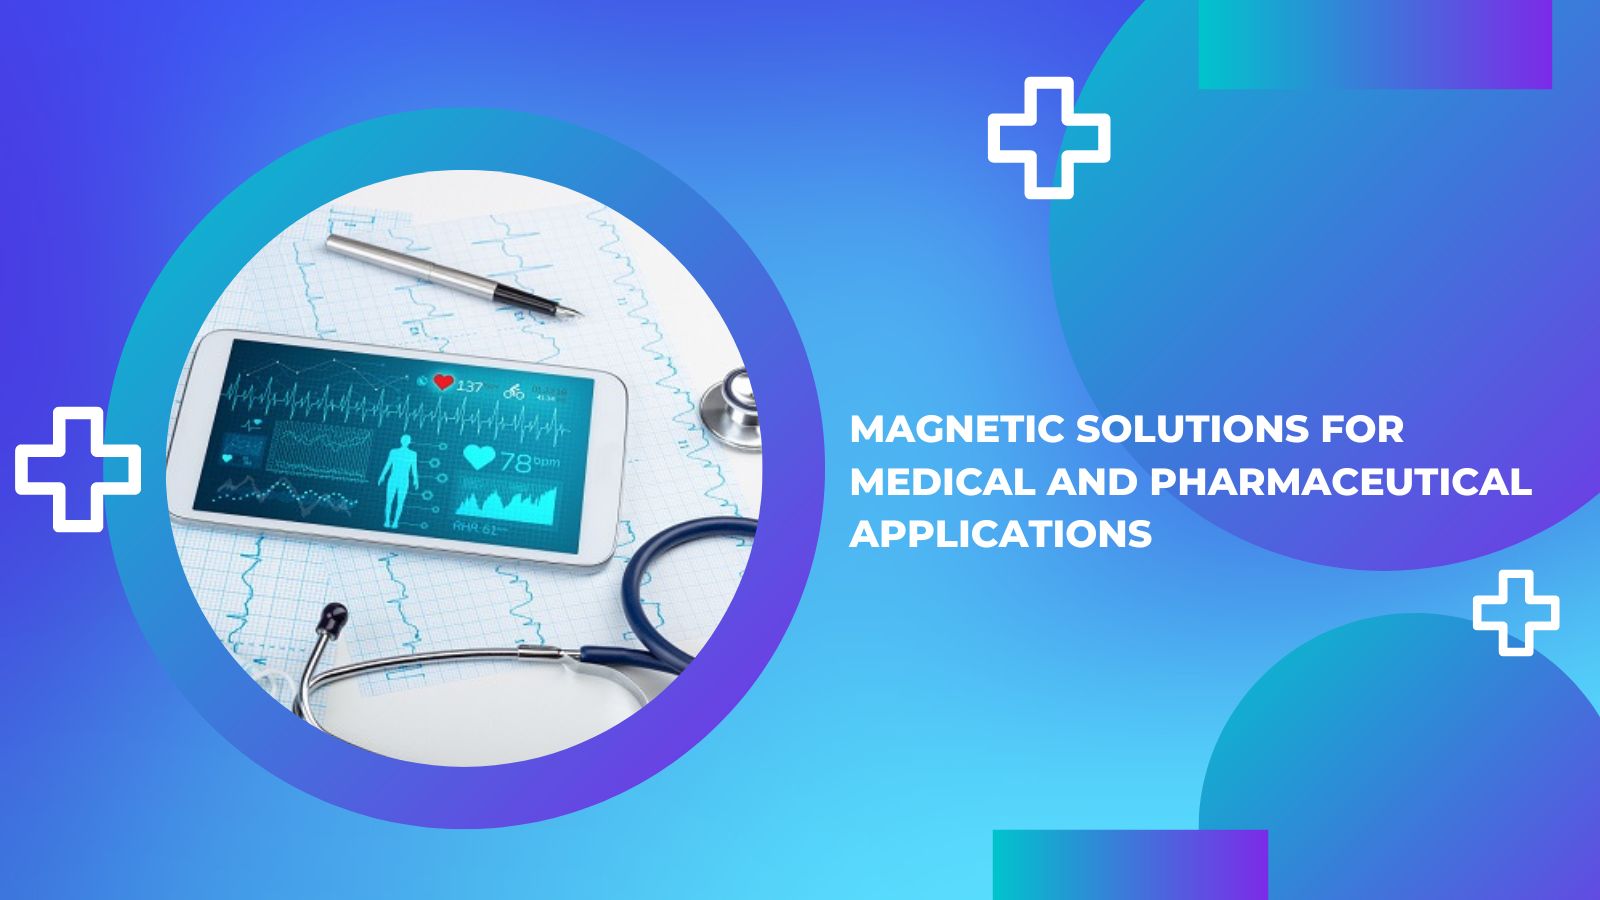 Magnetic Solutions for Medical and Pharmaceutical Applications